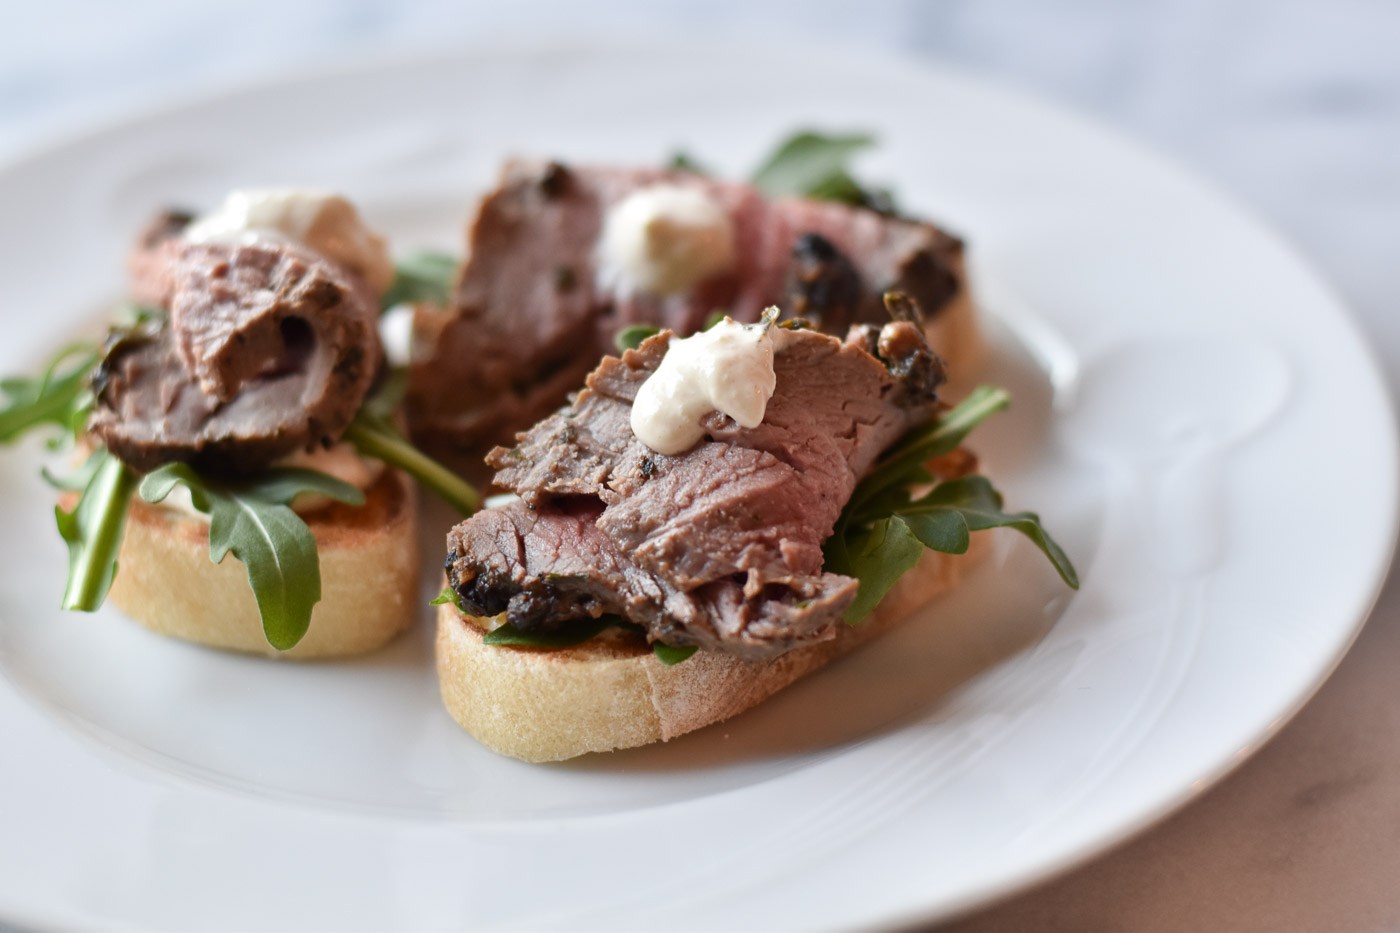 Eat at an Endless Buffet & We'll Guess Your Age & Gender Quiz beef crostini